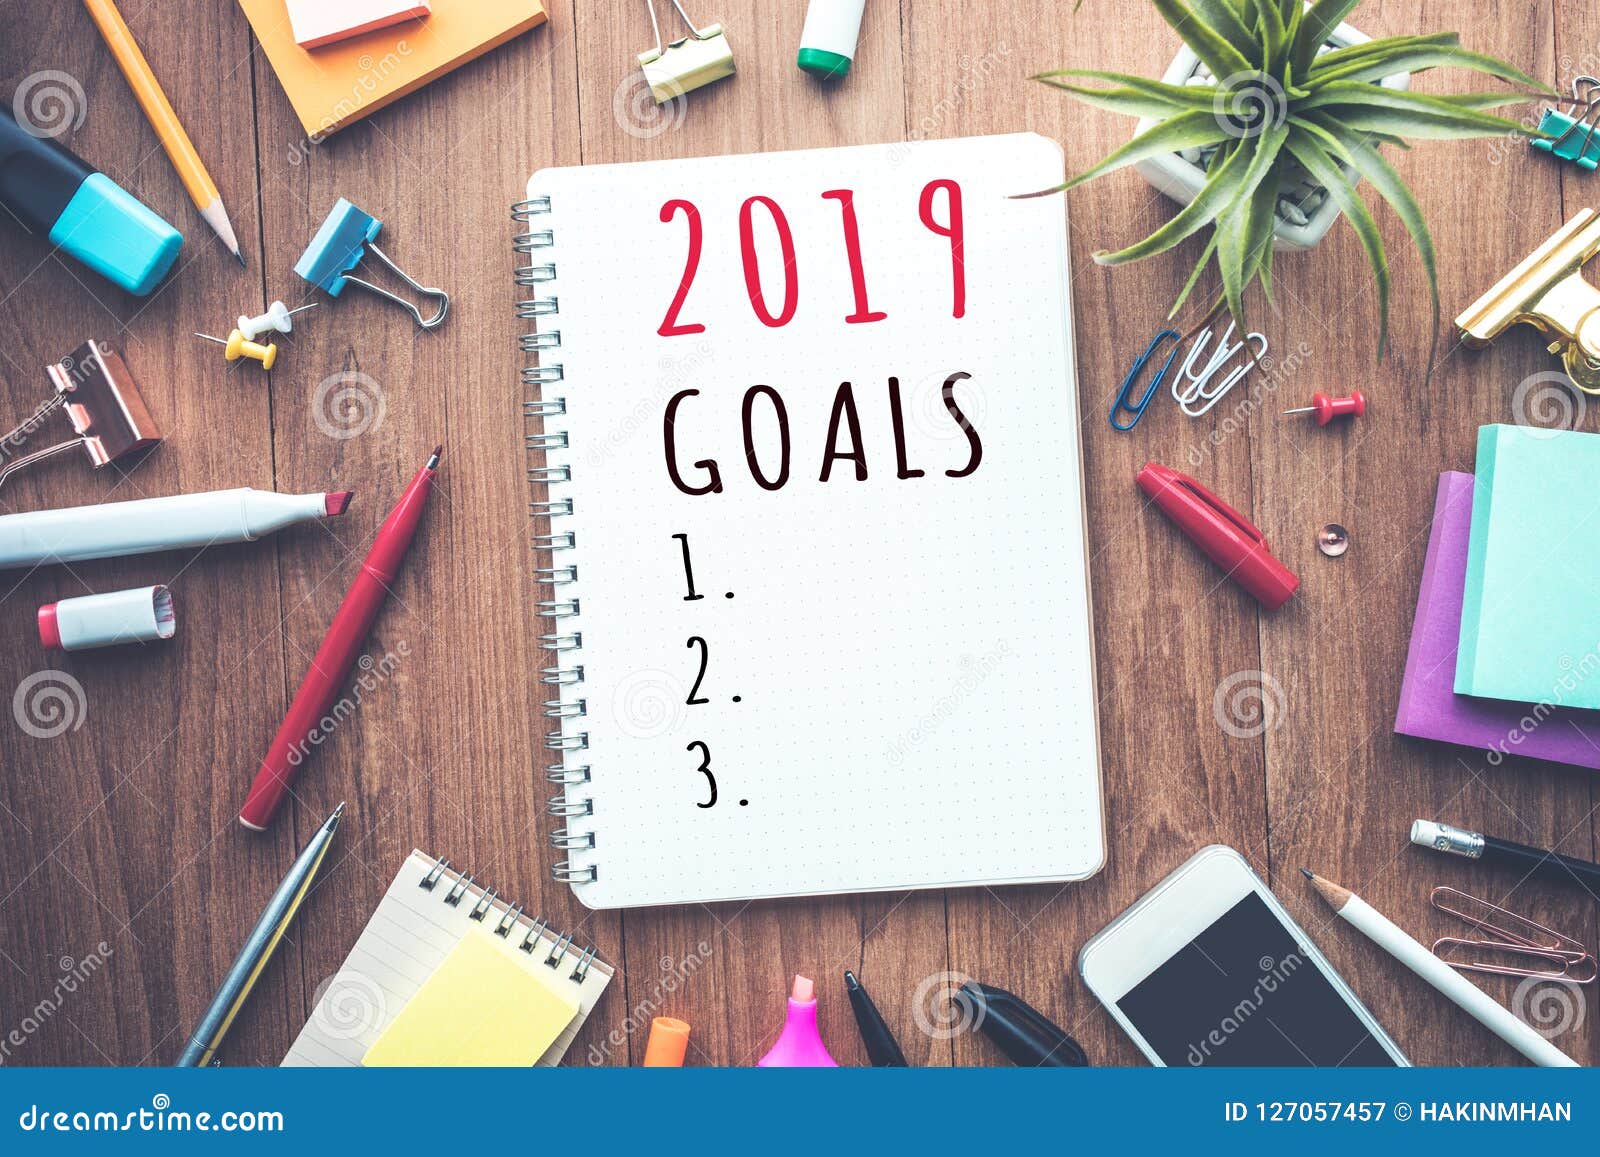 2019 goals text on notepad with office accessories.Business plan